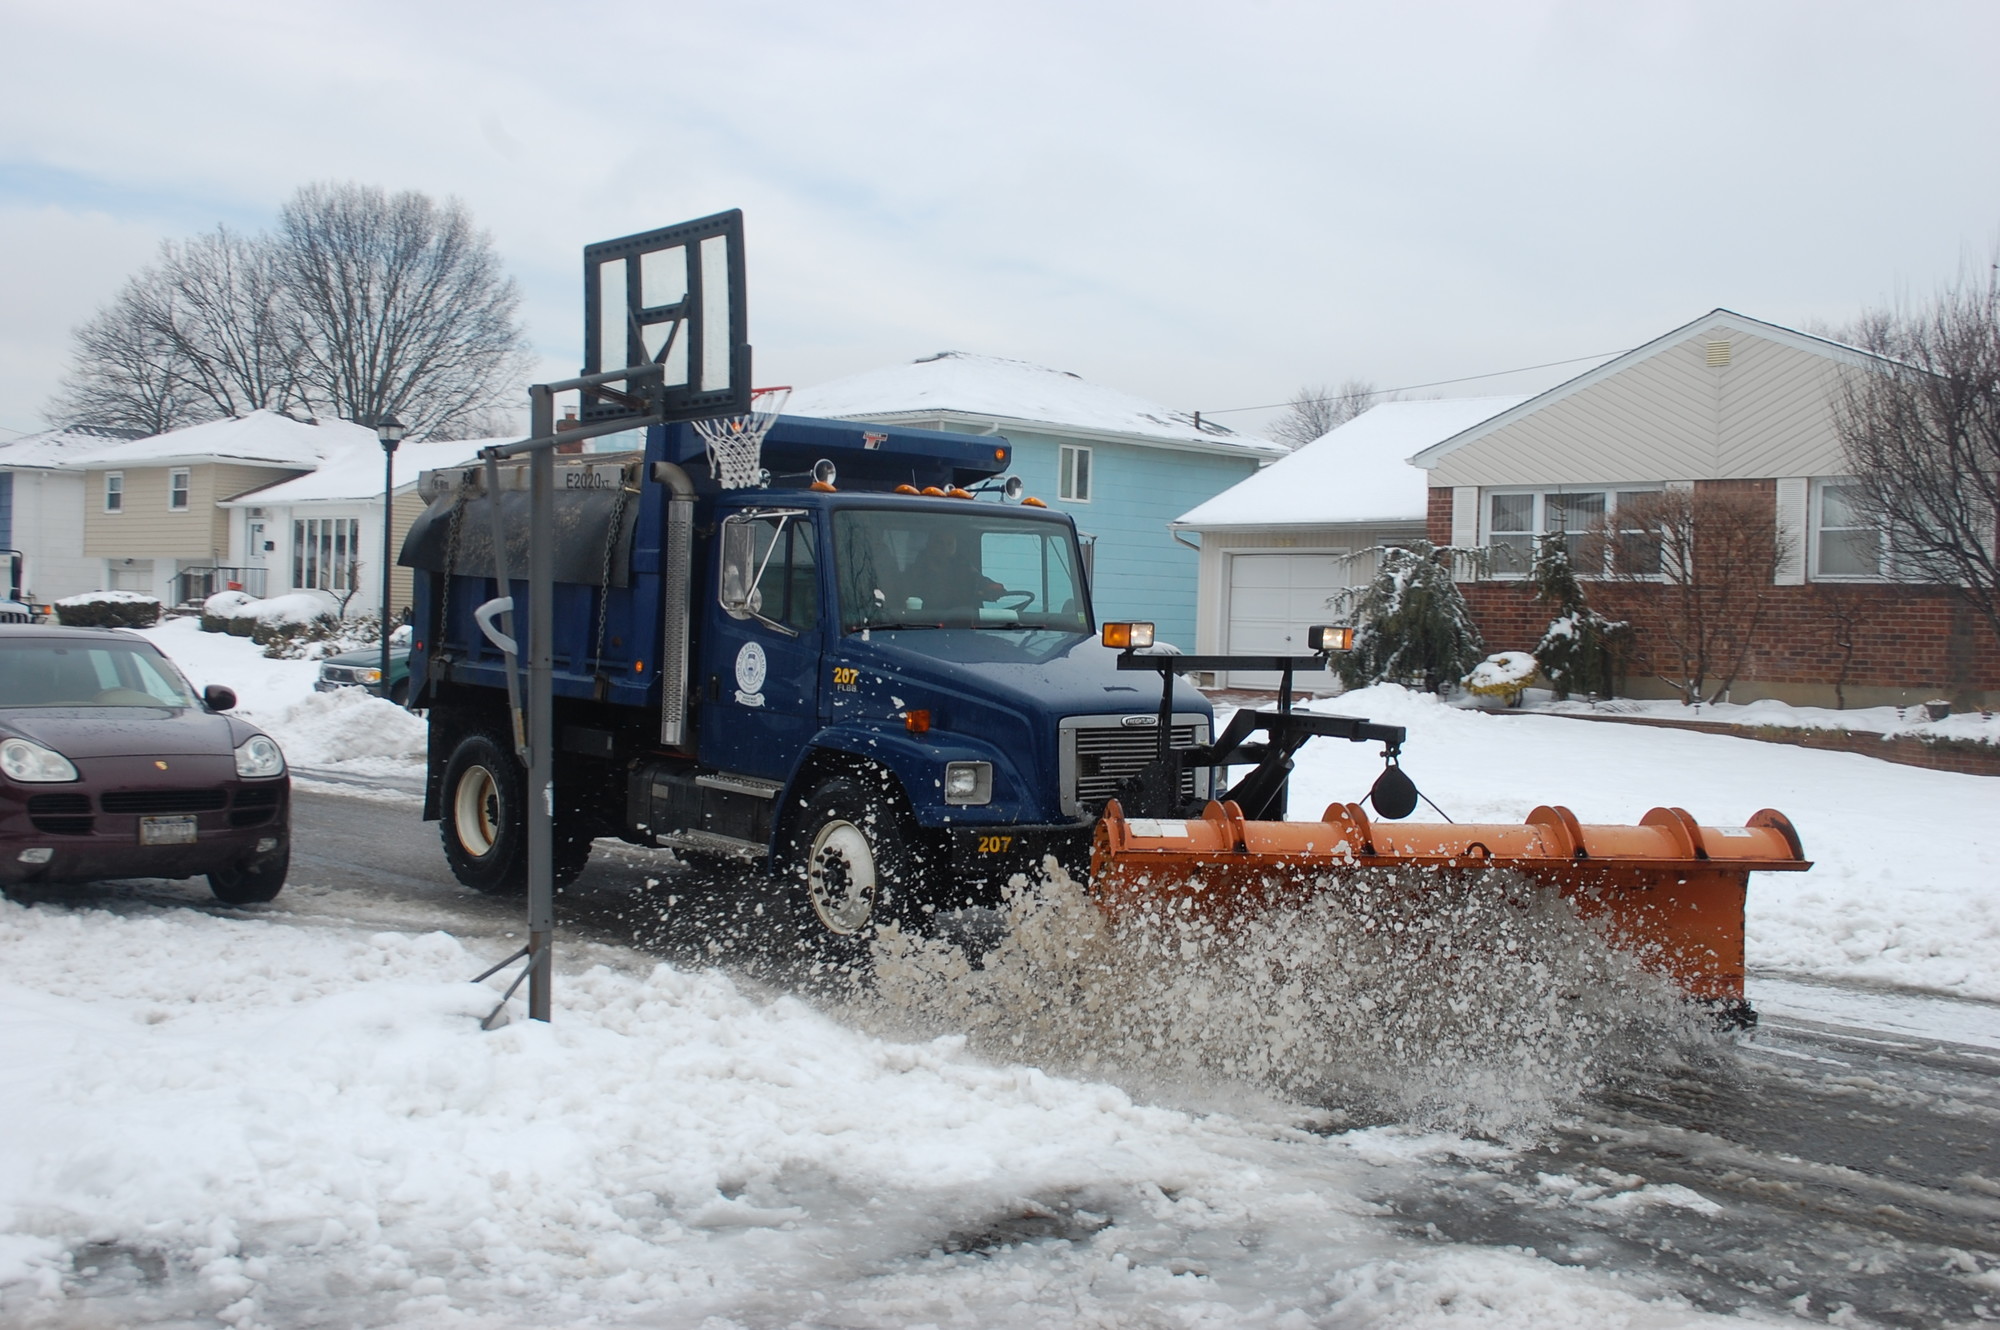 A Town of Hempstead plow clears Milanna Drive in Wantagh following a recent snowstorm.